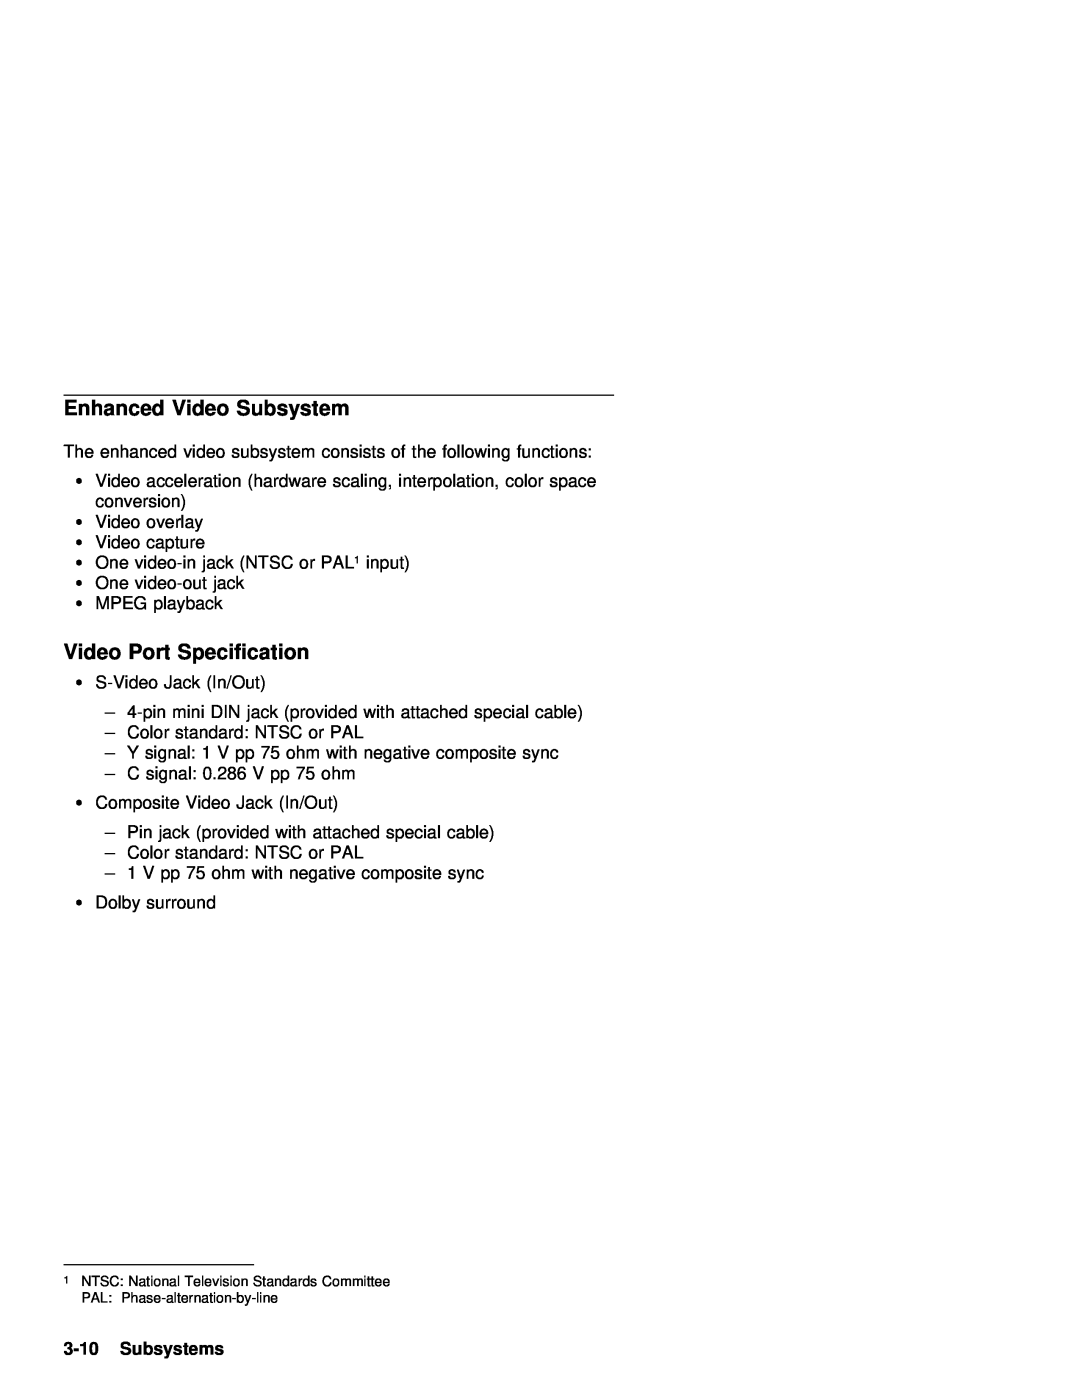 IBM 770 manual Enhanced Video Subsystem, Video Port Specification, Subsystems 